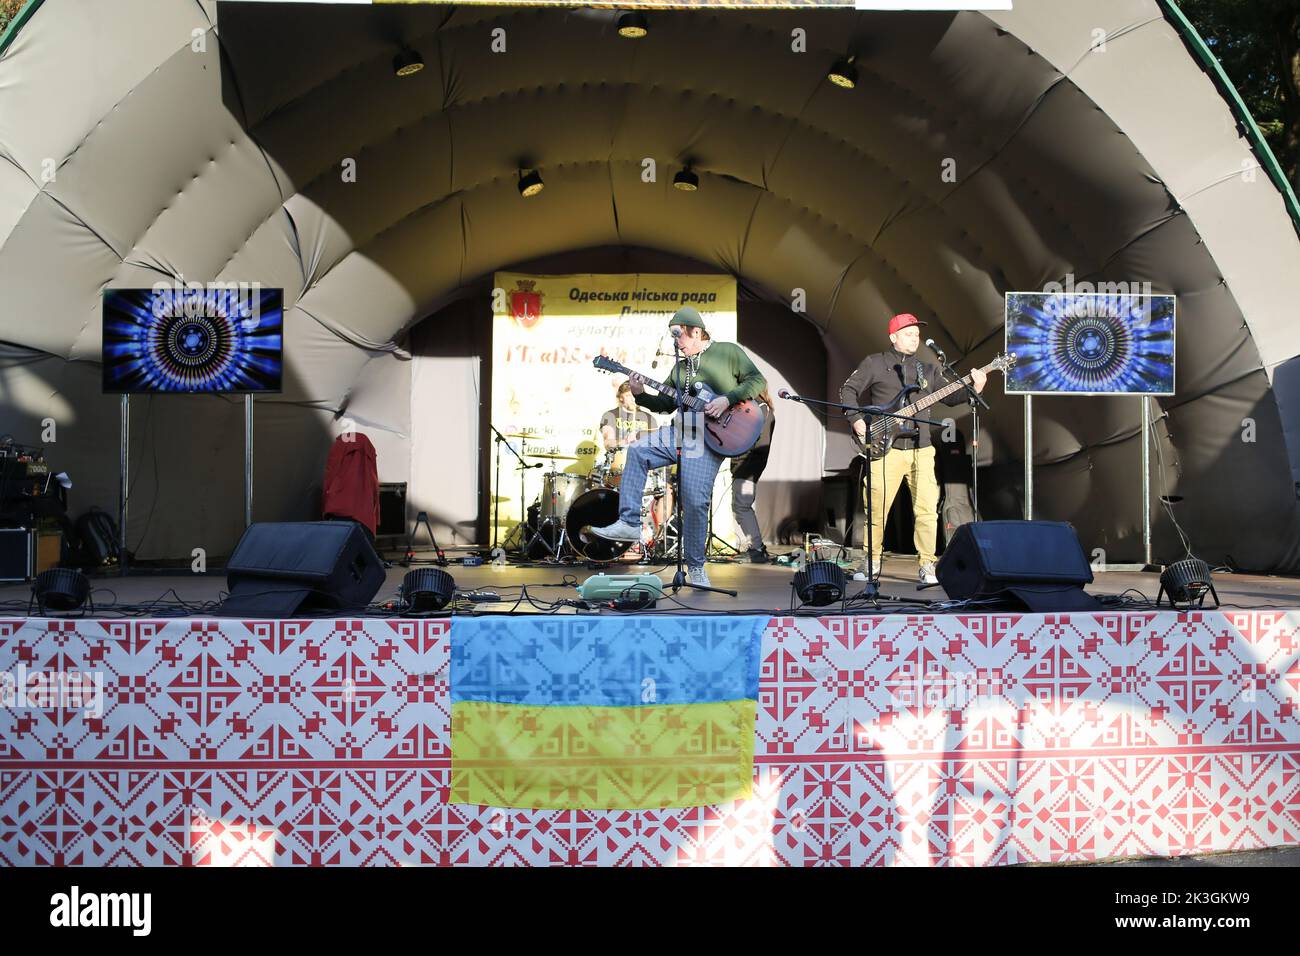 Stanislav Yasko (C), Valentin Olekhnovych (L), and Vladislav Biliy (R) from Stas Lenin Band are seen performing during the festival. The composition of the Stas Lenin Band - Stanislav Yasko - vocals, guitar, Valentin Olekhnovych - drums, Vladislav Biliy - guitar. The purpose of the 'Family Weekend ' festival is to raise funds for the purchase of a mobile dental office for the Armed Forces of Ukraine. During the festival, visitors had the opportunity to listen to a concert, take photos with vintage cars, watch cheerleaders perform, attend master classes for children. Stock Photo